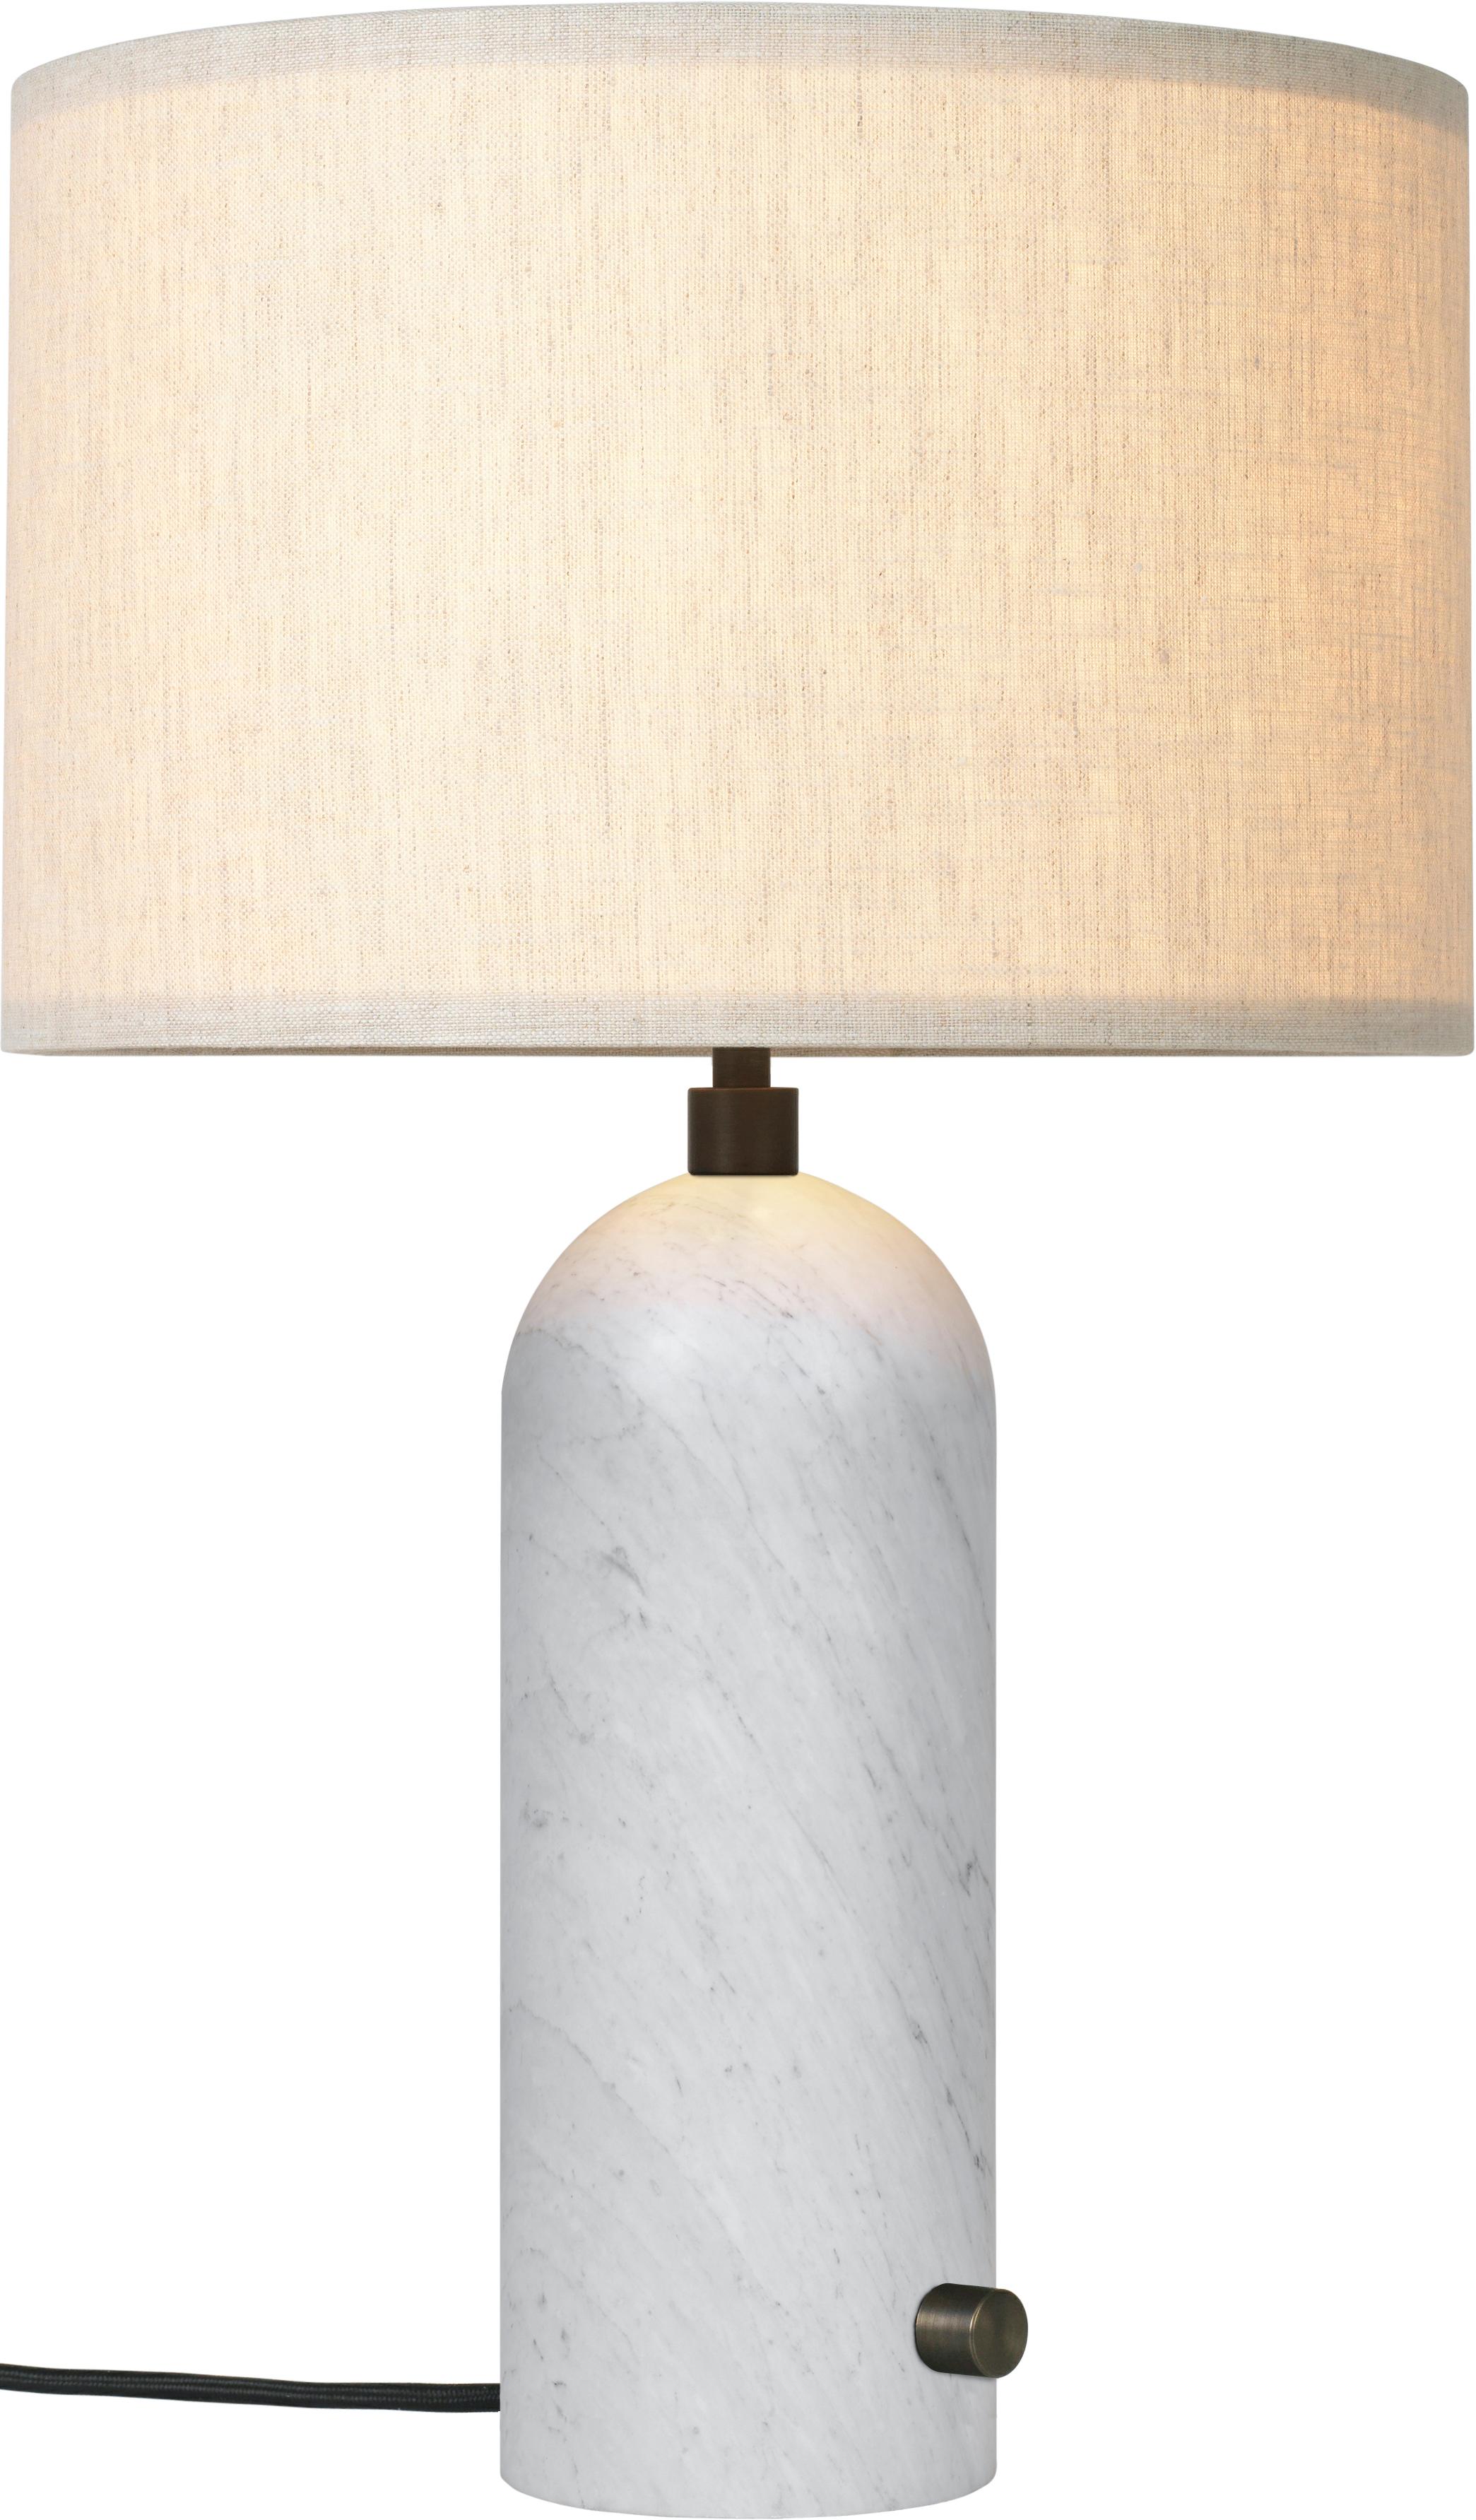 Large 'Gravity' Marble Table Lamp by Space Copenhagen for Gubi in Grey For Sale 2